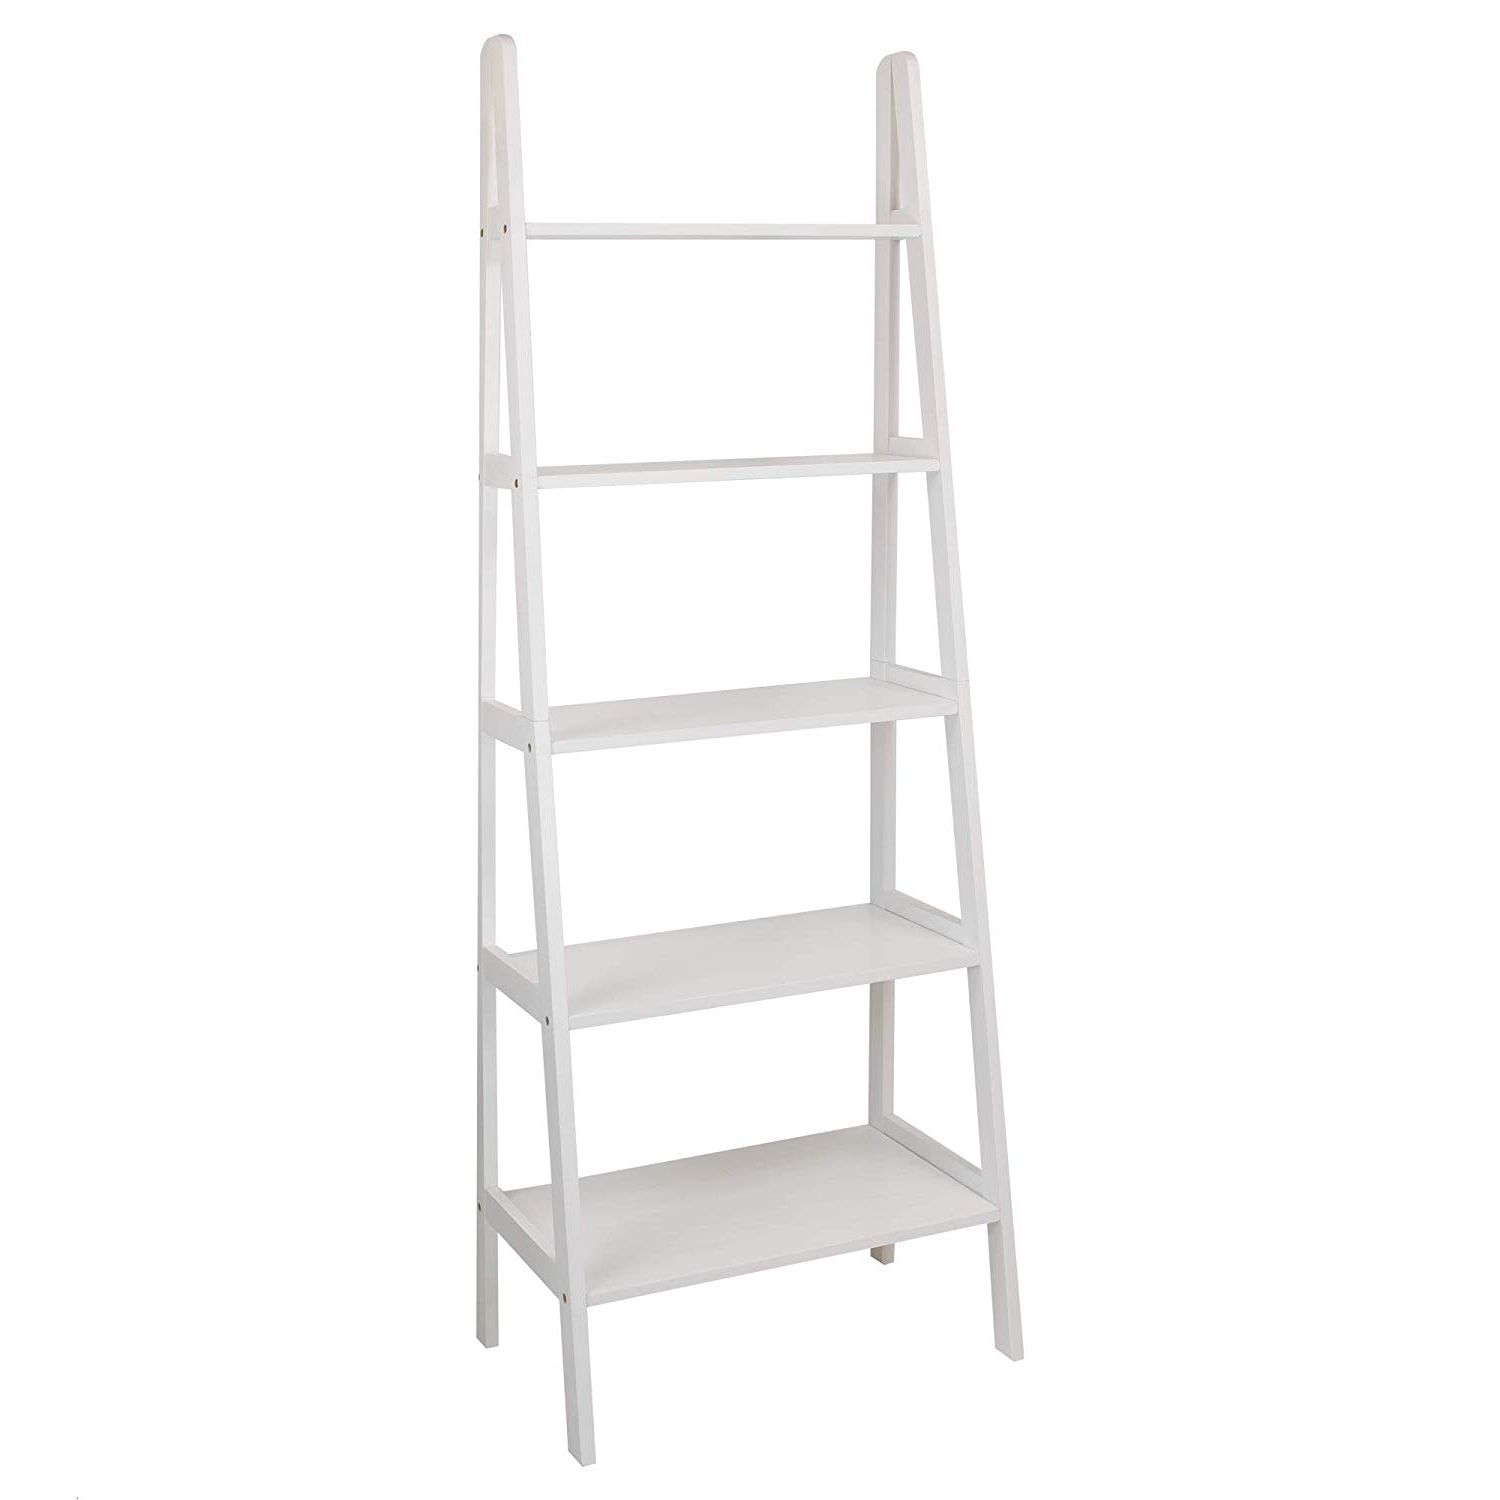 2019 White Ladder Bookcase Inside Ranie Ladder Bookcases (View 15 of 20)